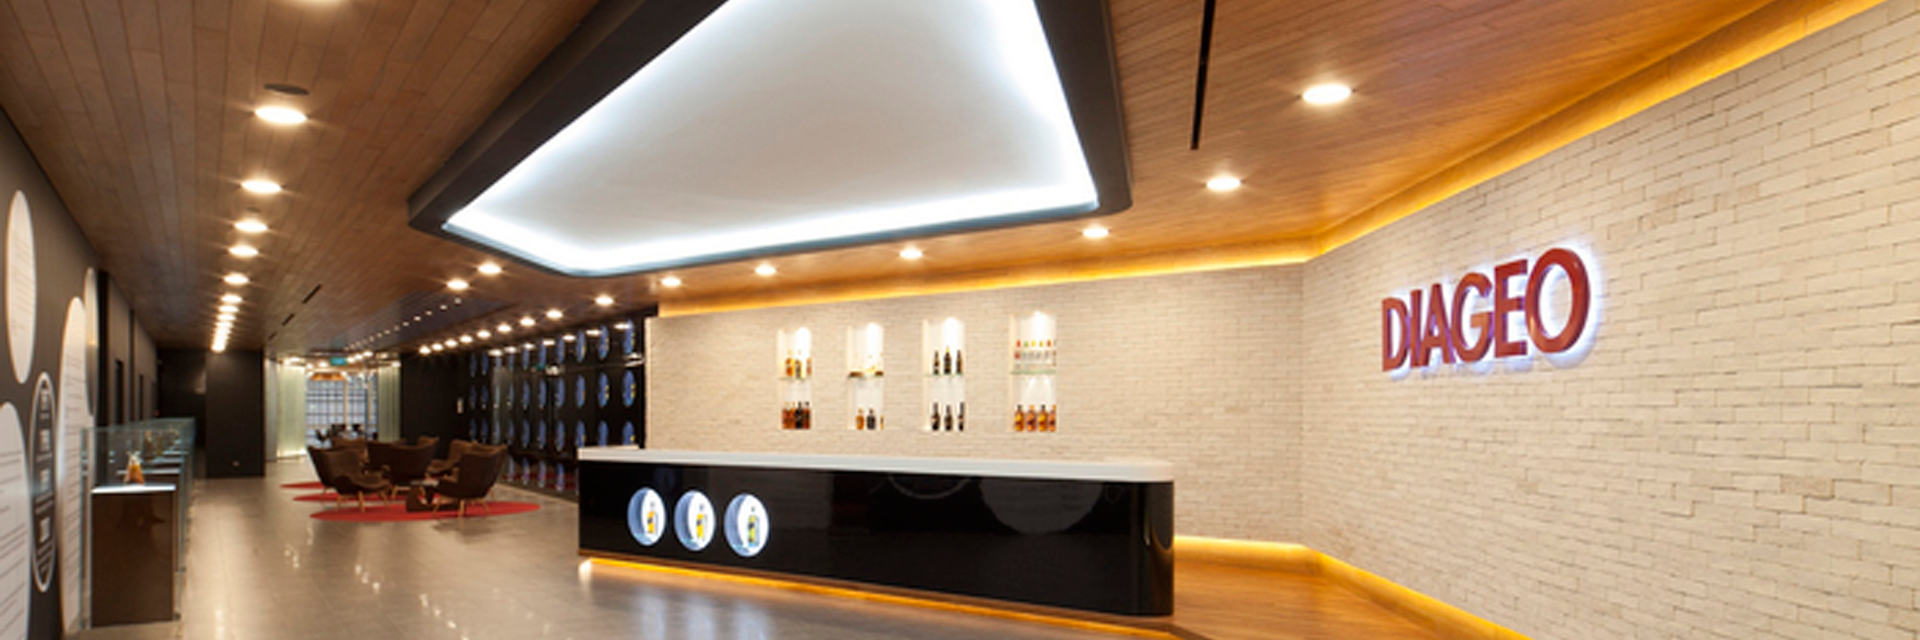 Diageo saves millions using a project value model